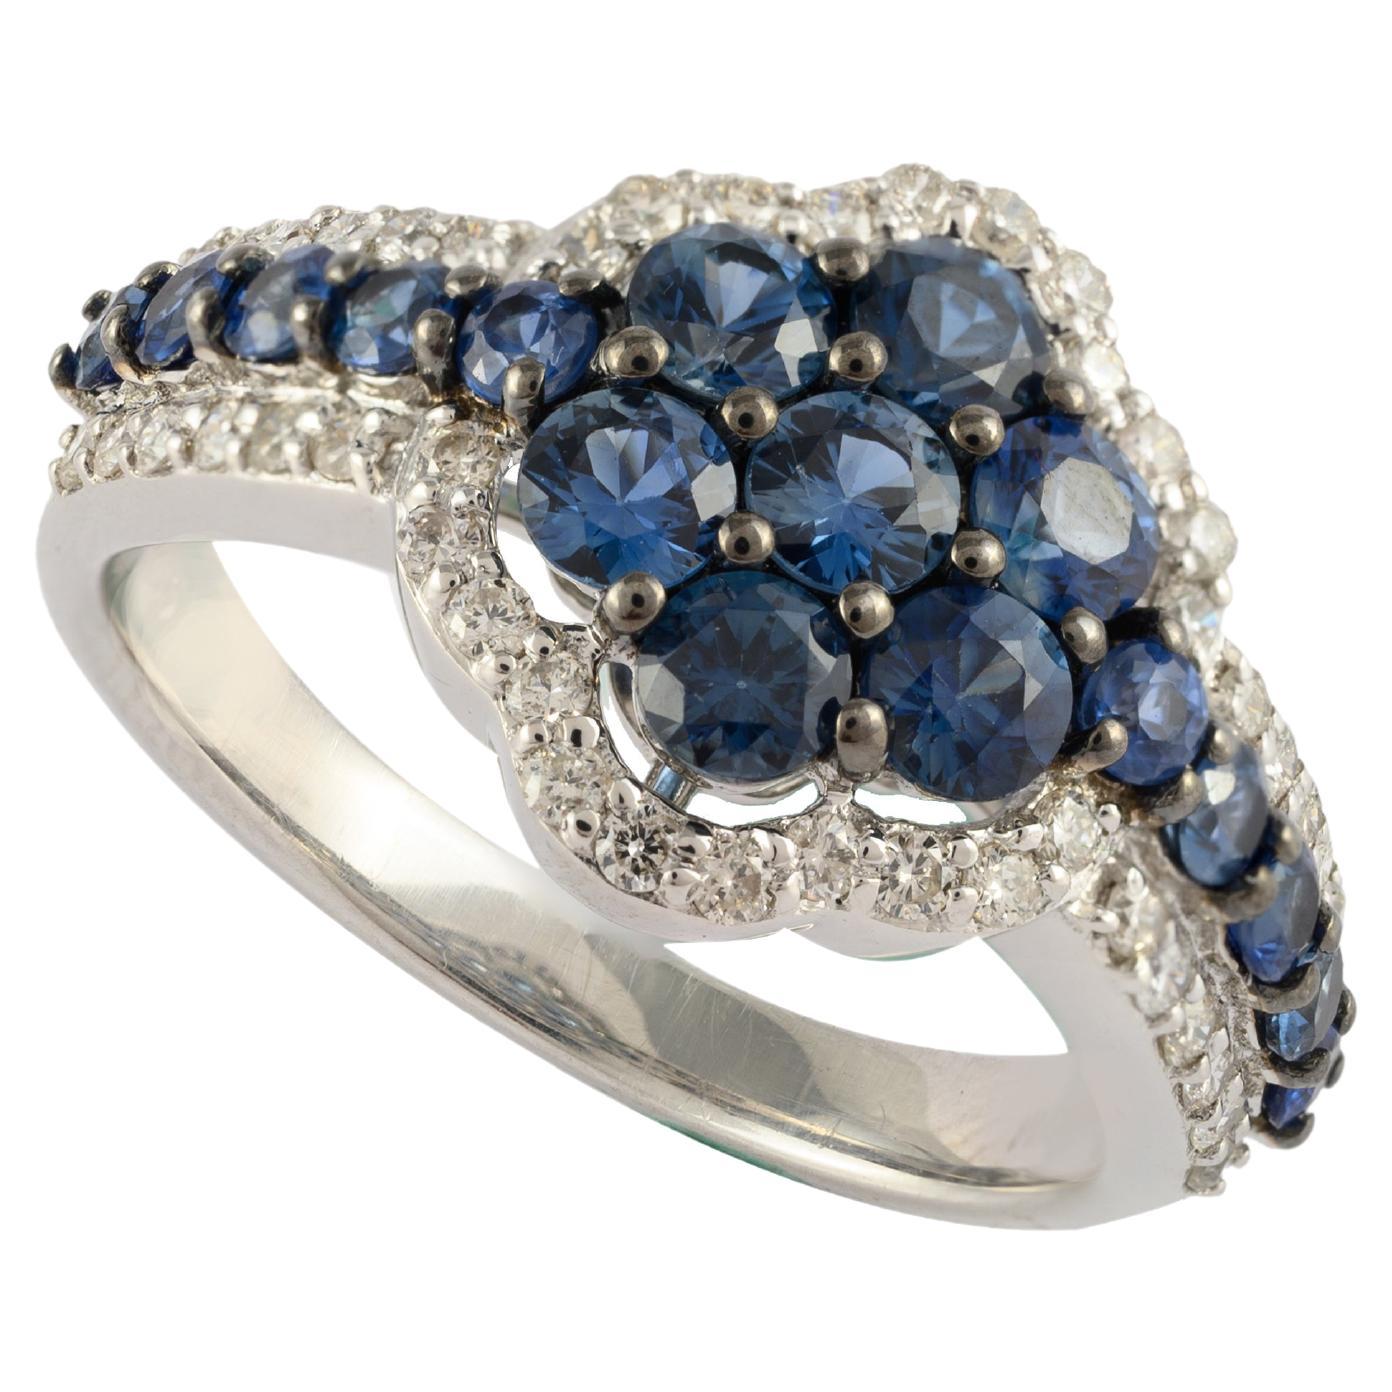 Unique Blue Sapphire Floral Ring with Diamonds in 14k Solid White Gold